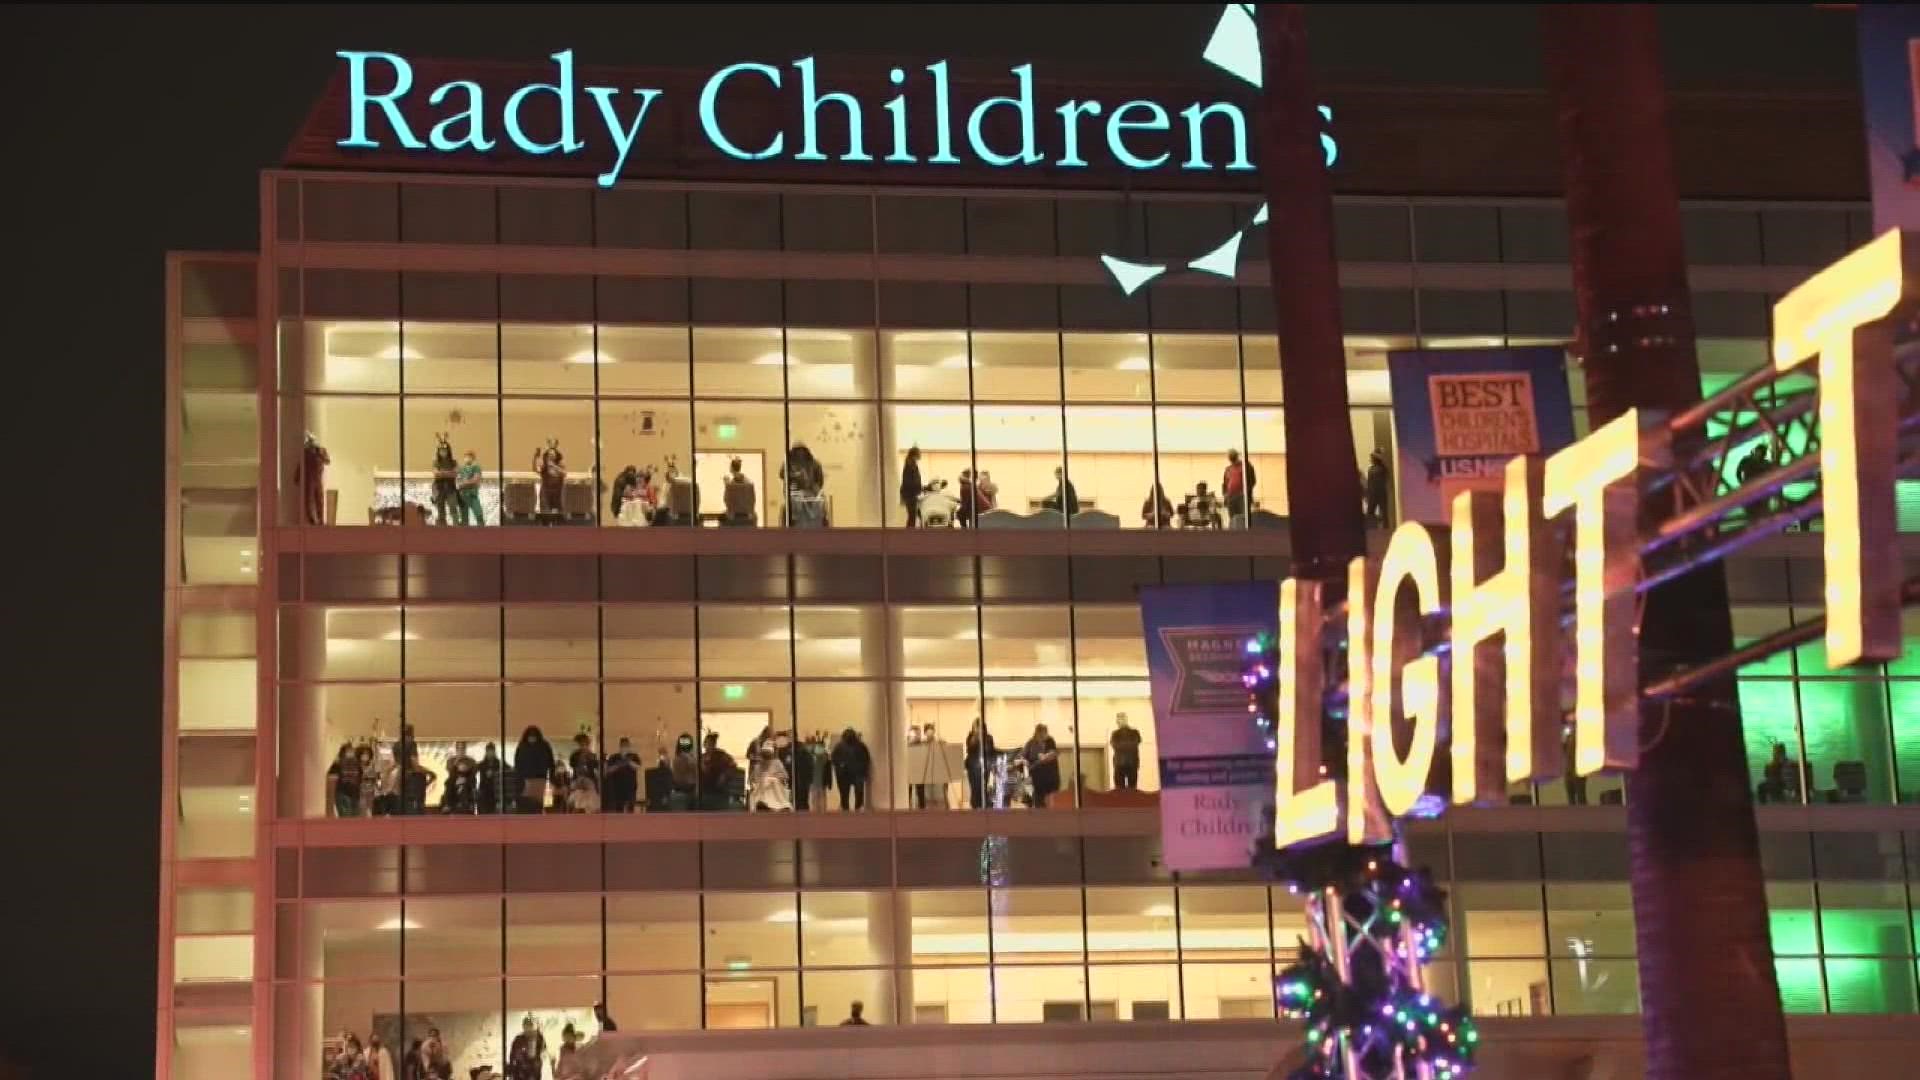 Rady Children's Hospital is hoping you will help "Light the Way" to help make this holiday season brighter for its patients and their families.